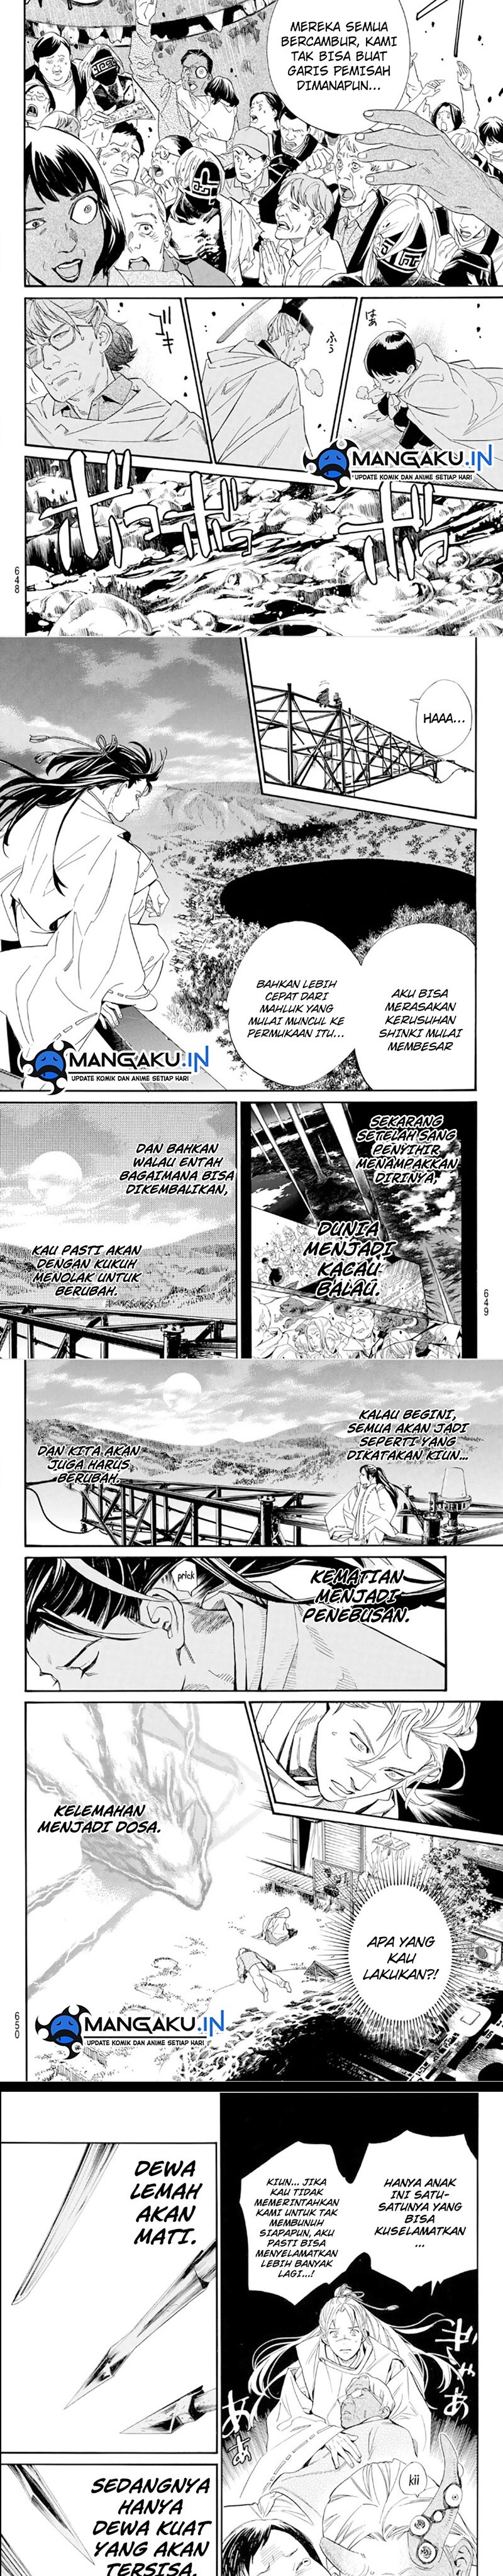 Noragami Chapter 107